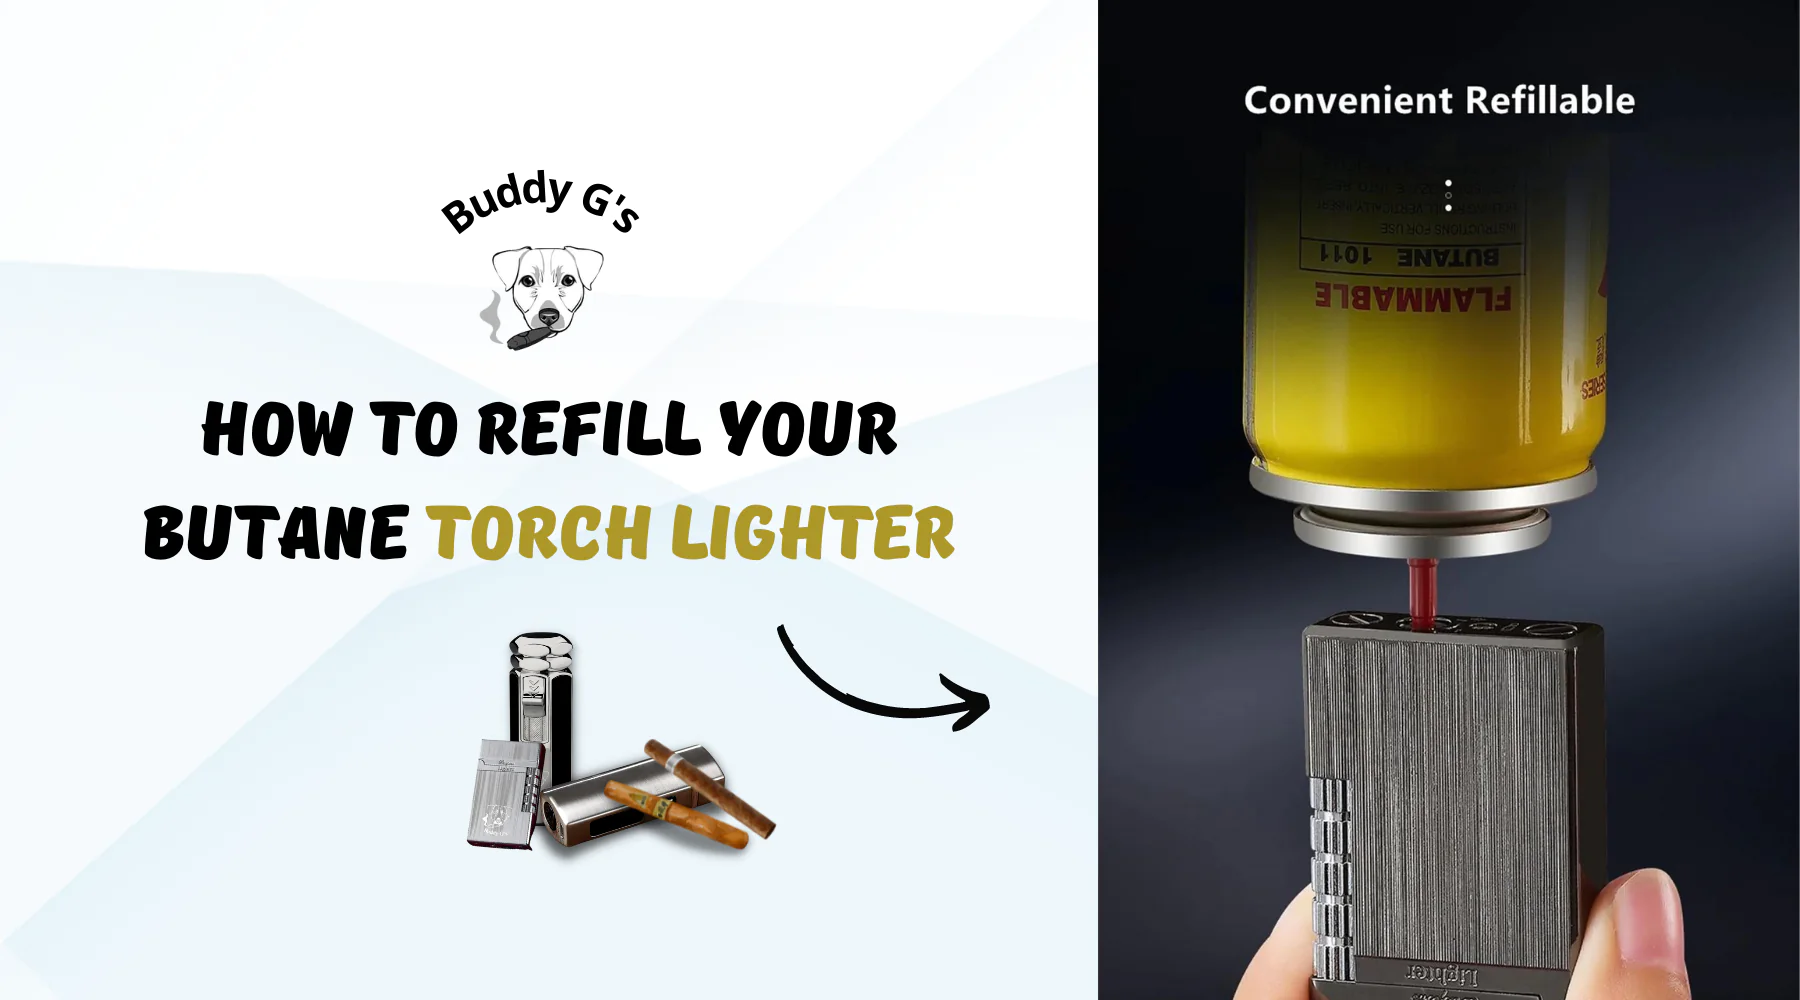 How To Refill Your Butane Torch Lighter?